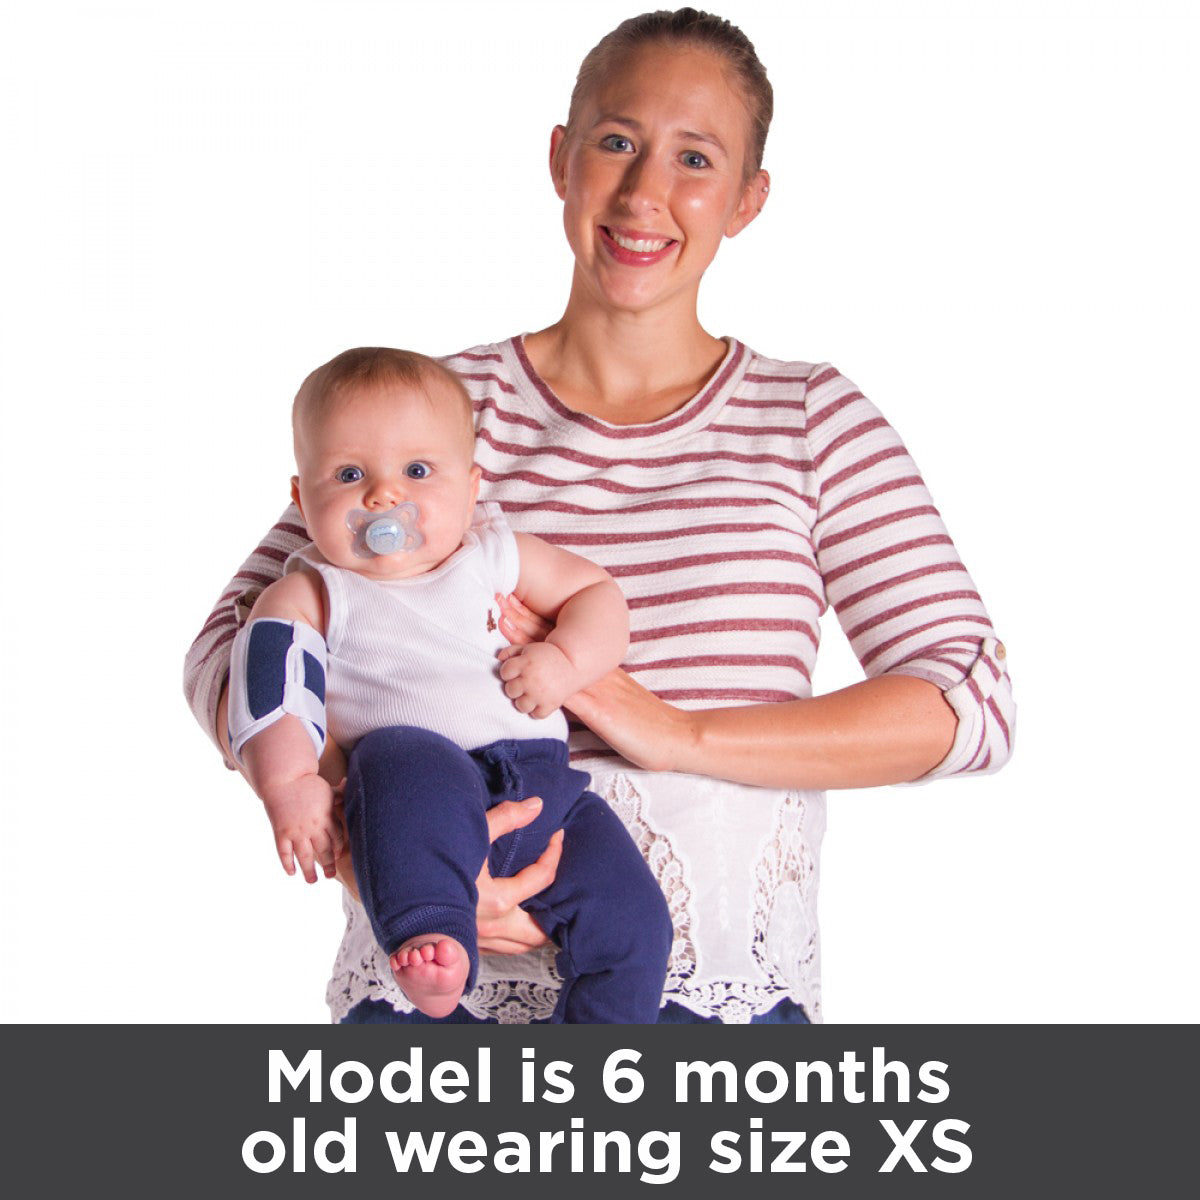 Our model at 6 months old wears the size XS, most babies and infants will be in this same size